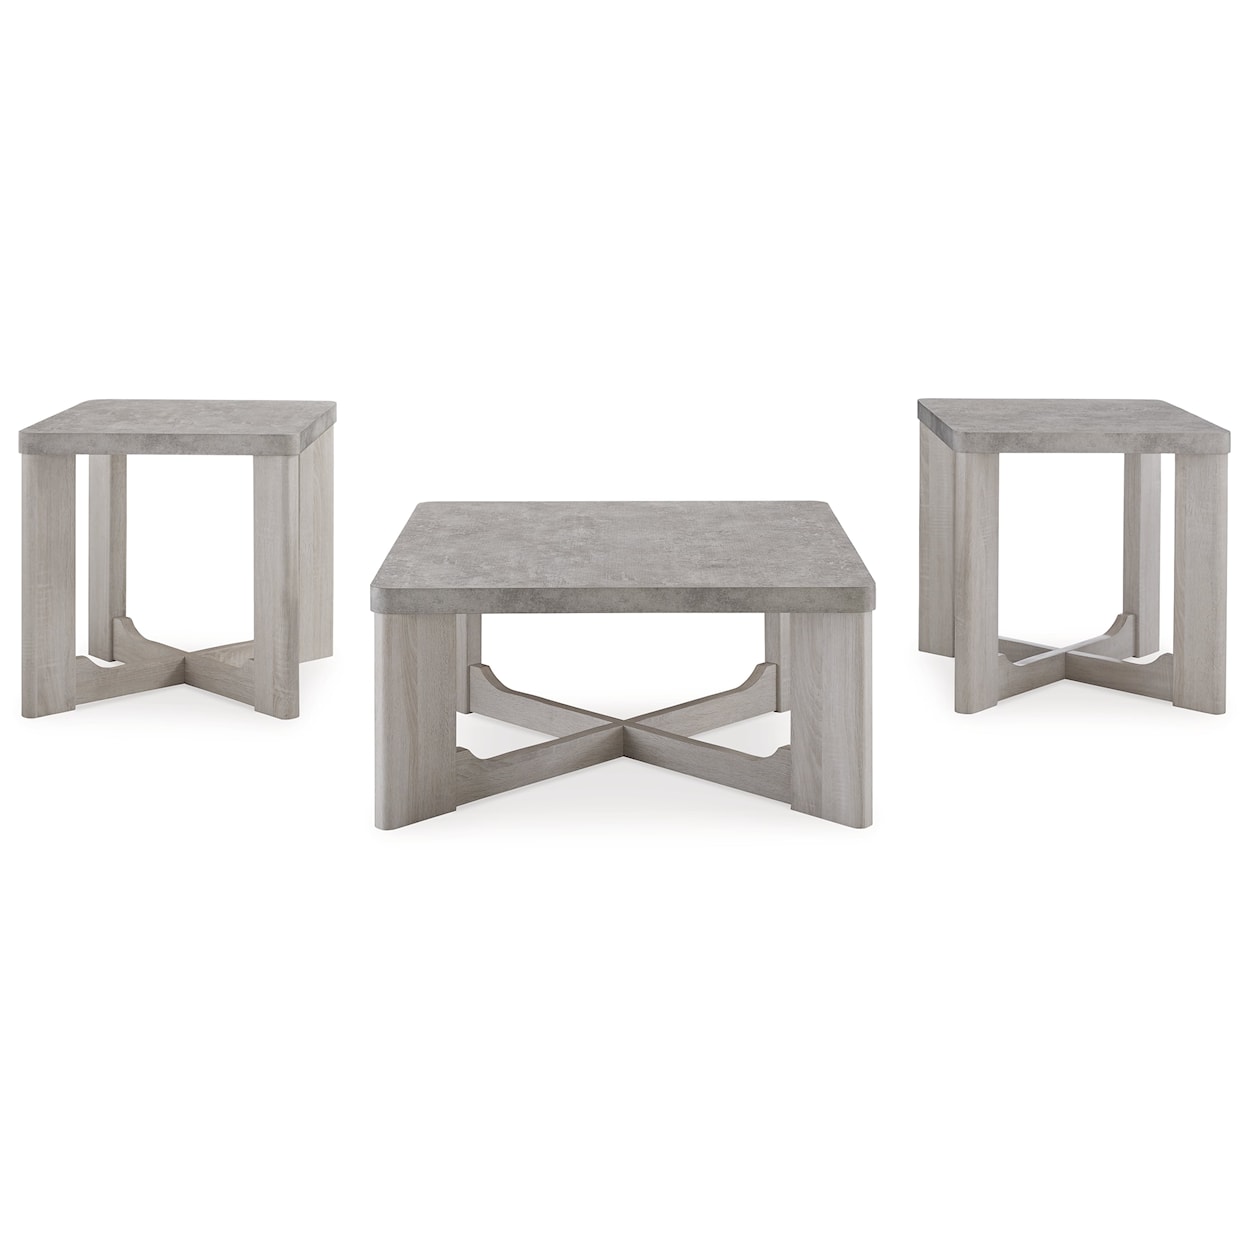 Signature Design Garnilly Occasional Table Set